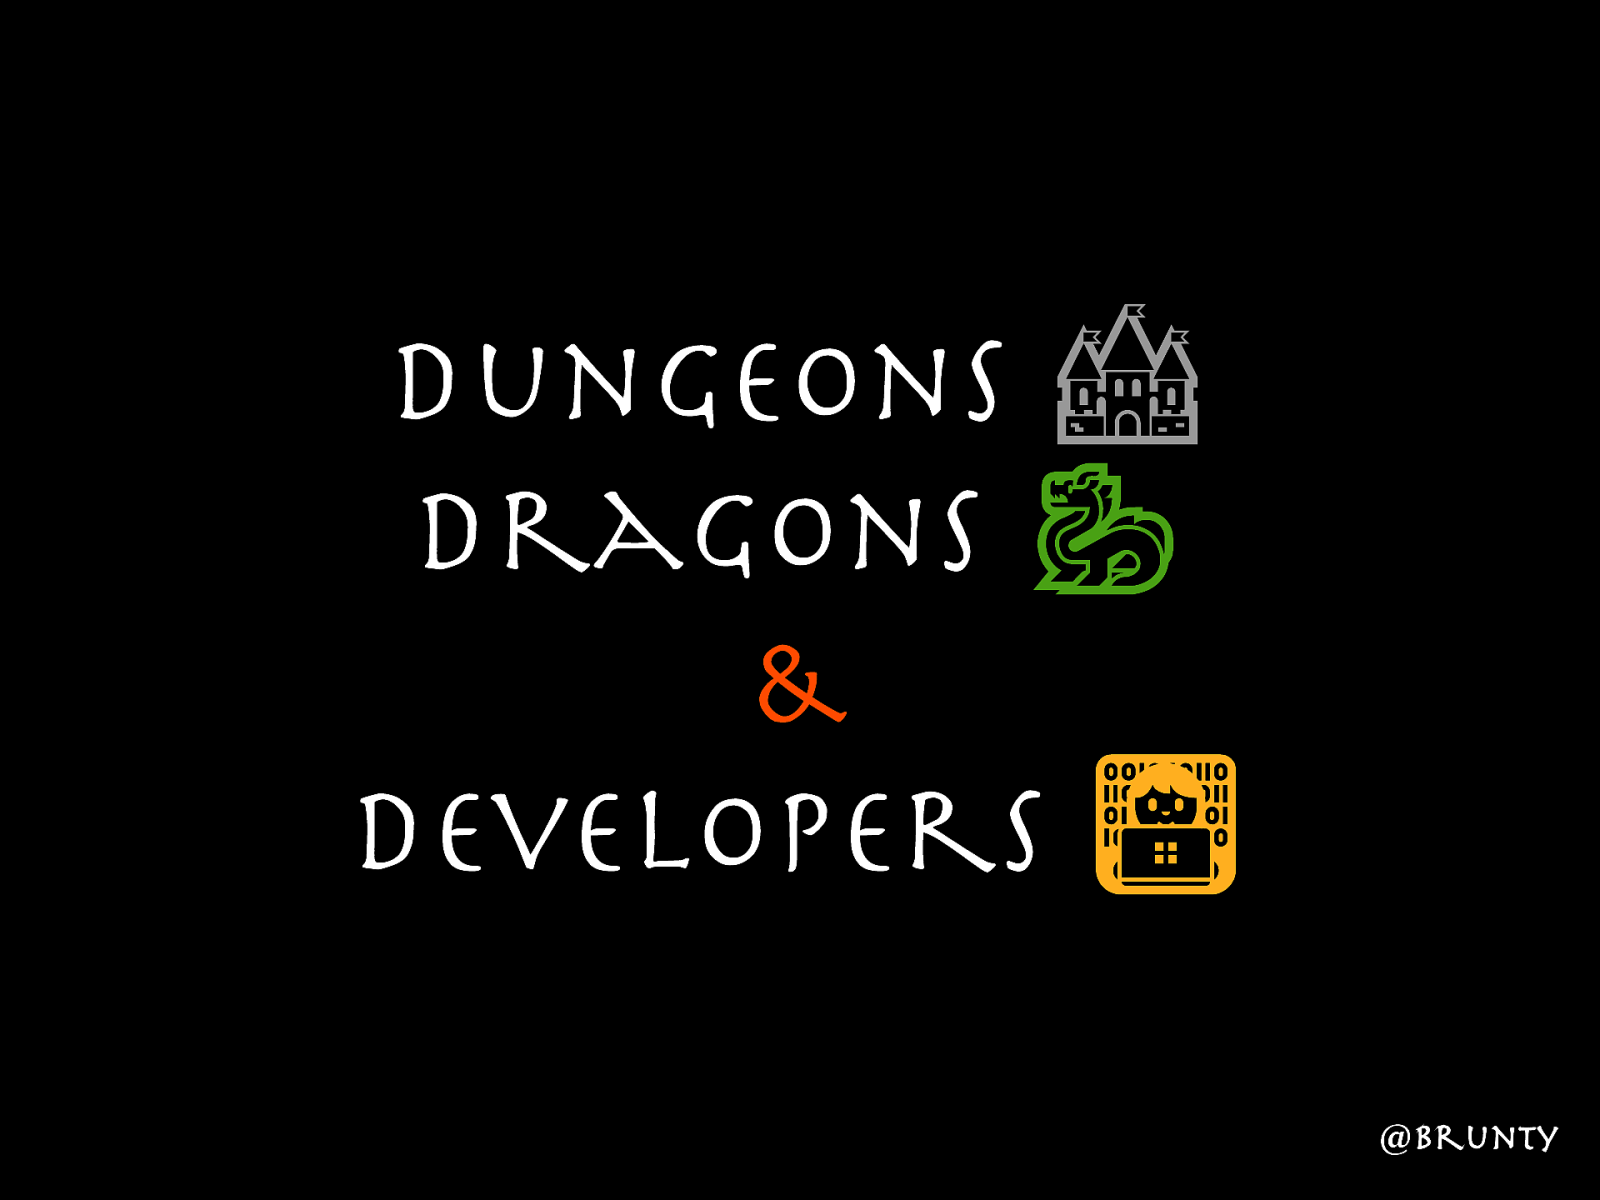 Dungeons, Dragons & Developers